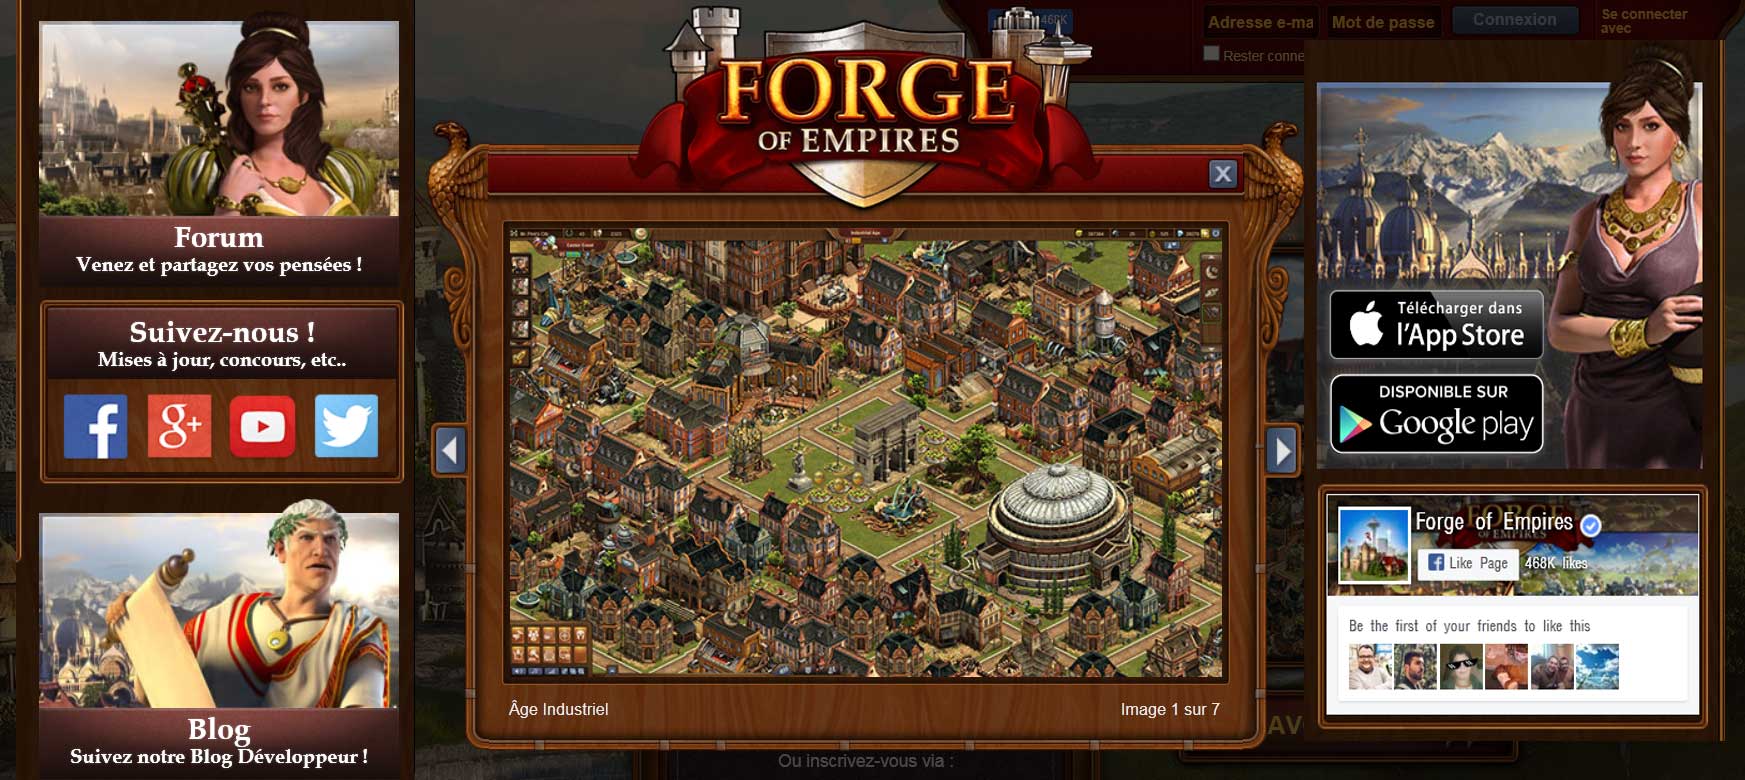 Forges of Empires